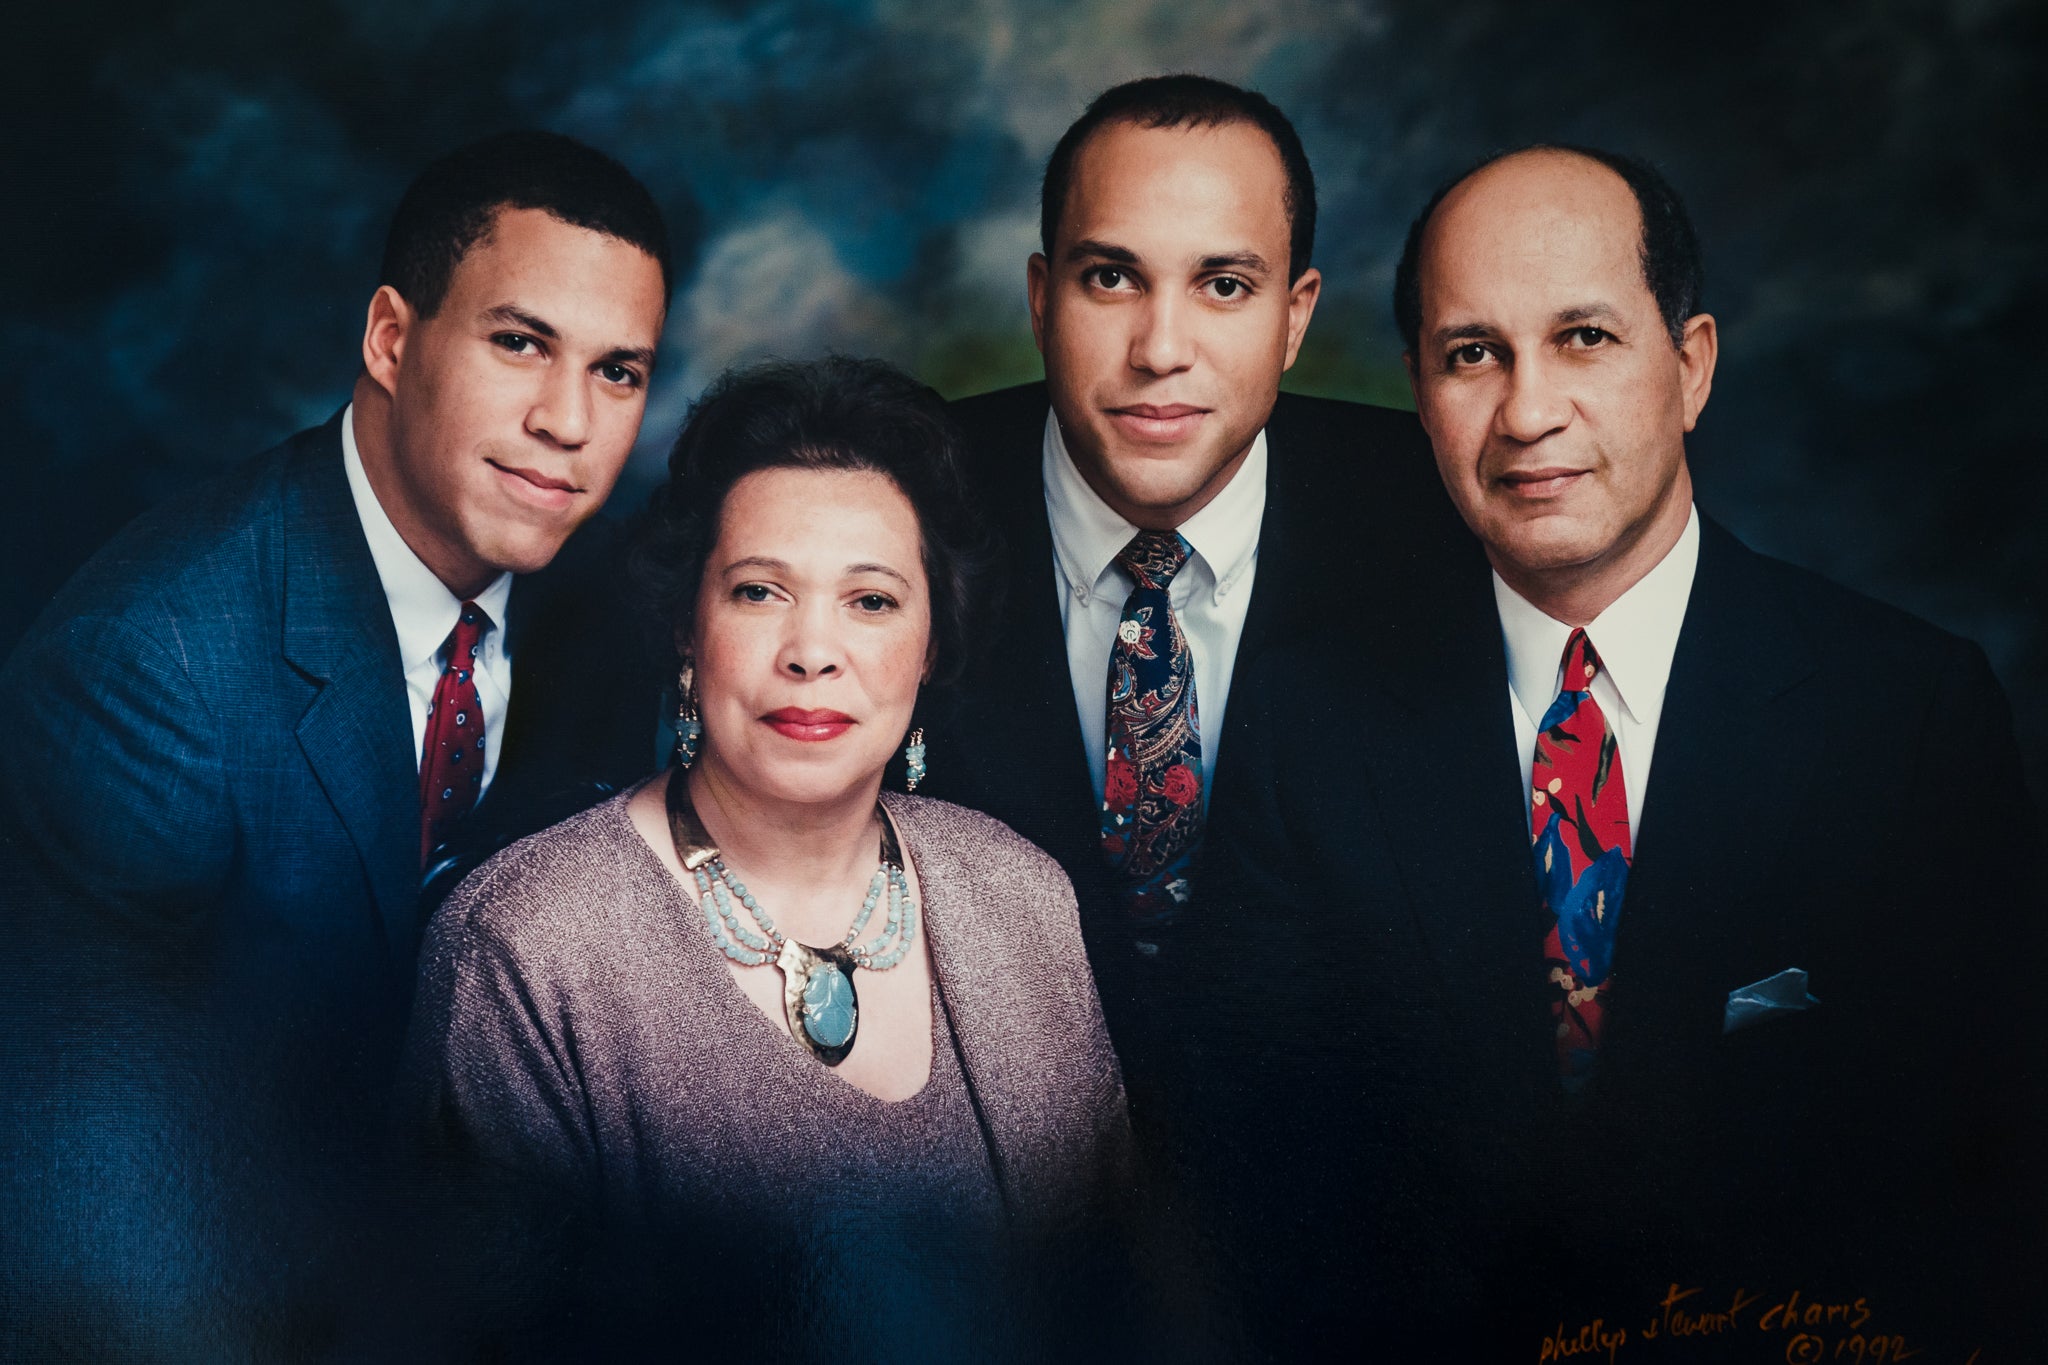 Cory Booker’s Mother Reflects On The Family Legacy Of Activism And Service